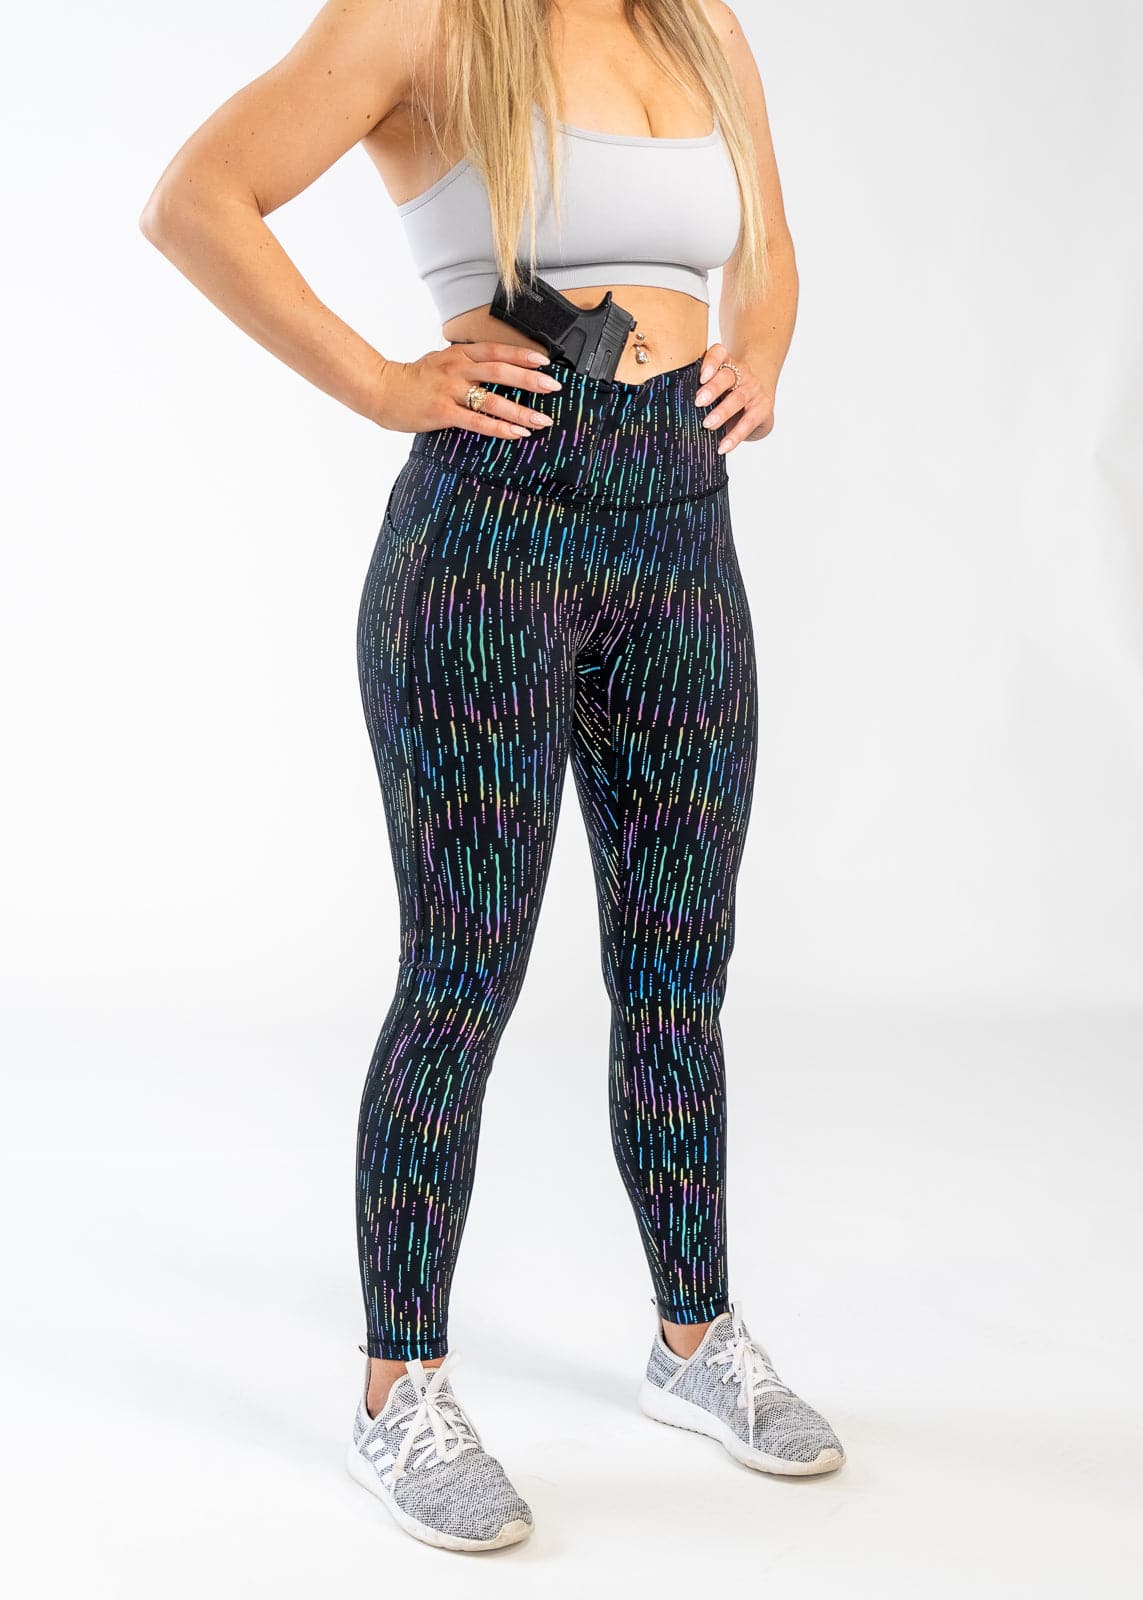 Concealed Carry Leggings With Pockets Shoulders Down 3/4 Front View Hands on Hips | Holographic Rain